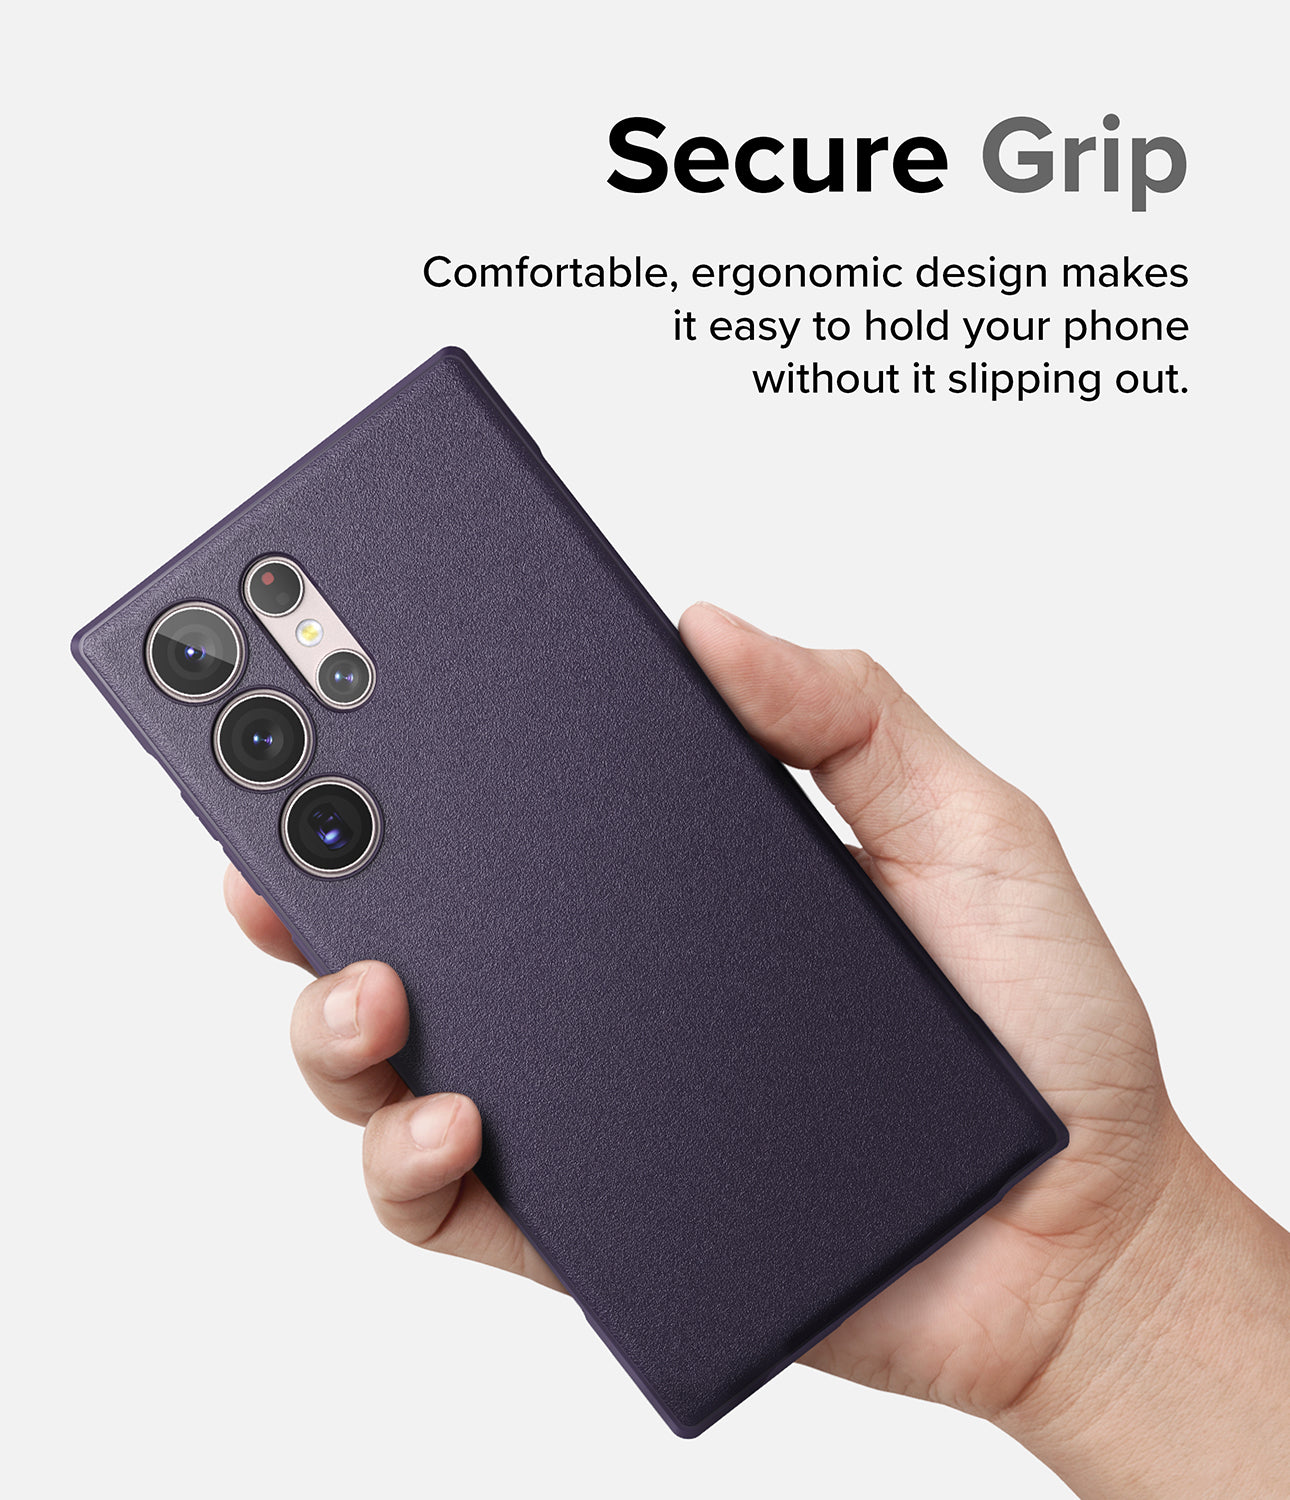 Galaxy S23 Ultra Case | Onyx - Deep Purple - Secure Grip. Comfortable, ergonomic design makes it easy to hole your phone without it slipping out.